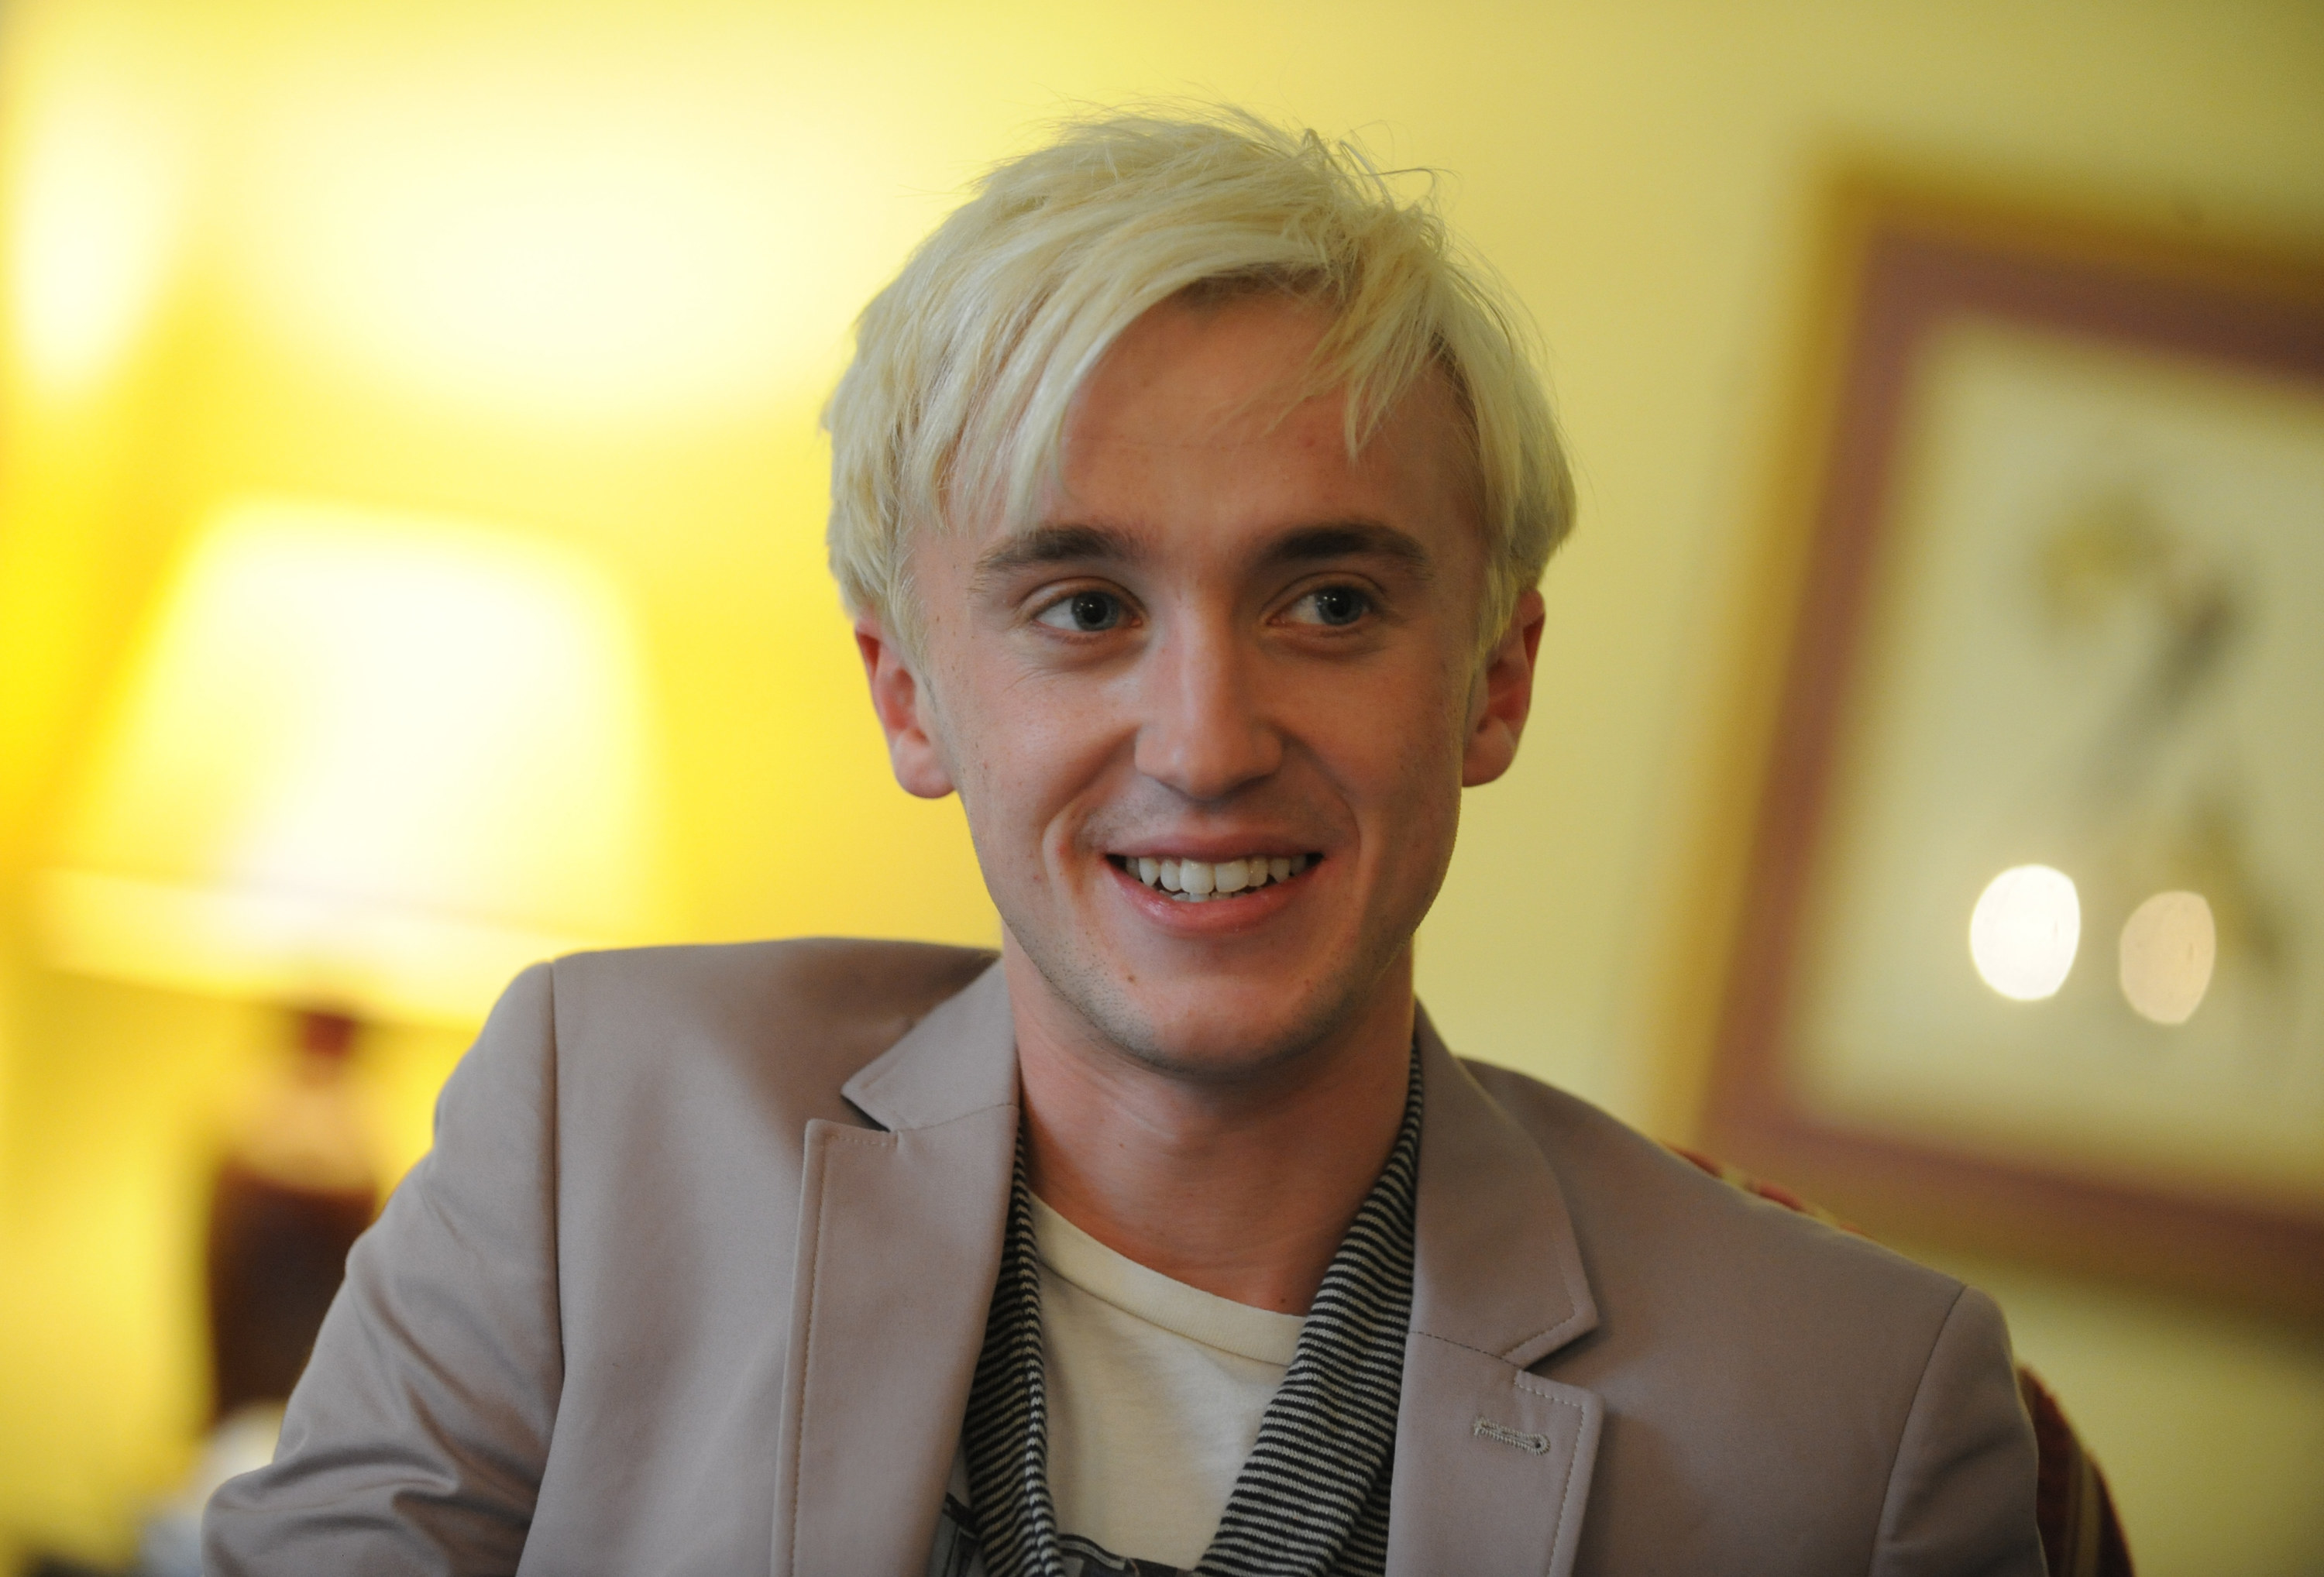 Tom Felton, who plays evil Draco Malfoy in the &quot;Harry Potter&quot; movies, smiles while being interviewed at the Royal York Hotel in London, 2009